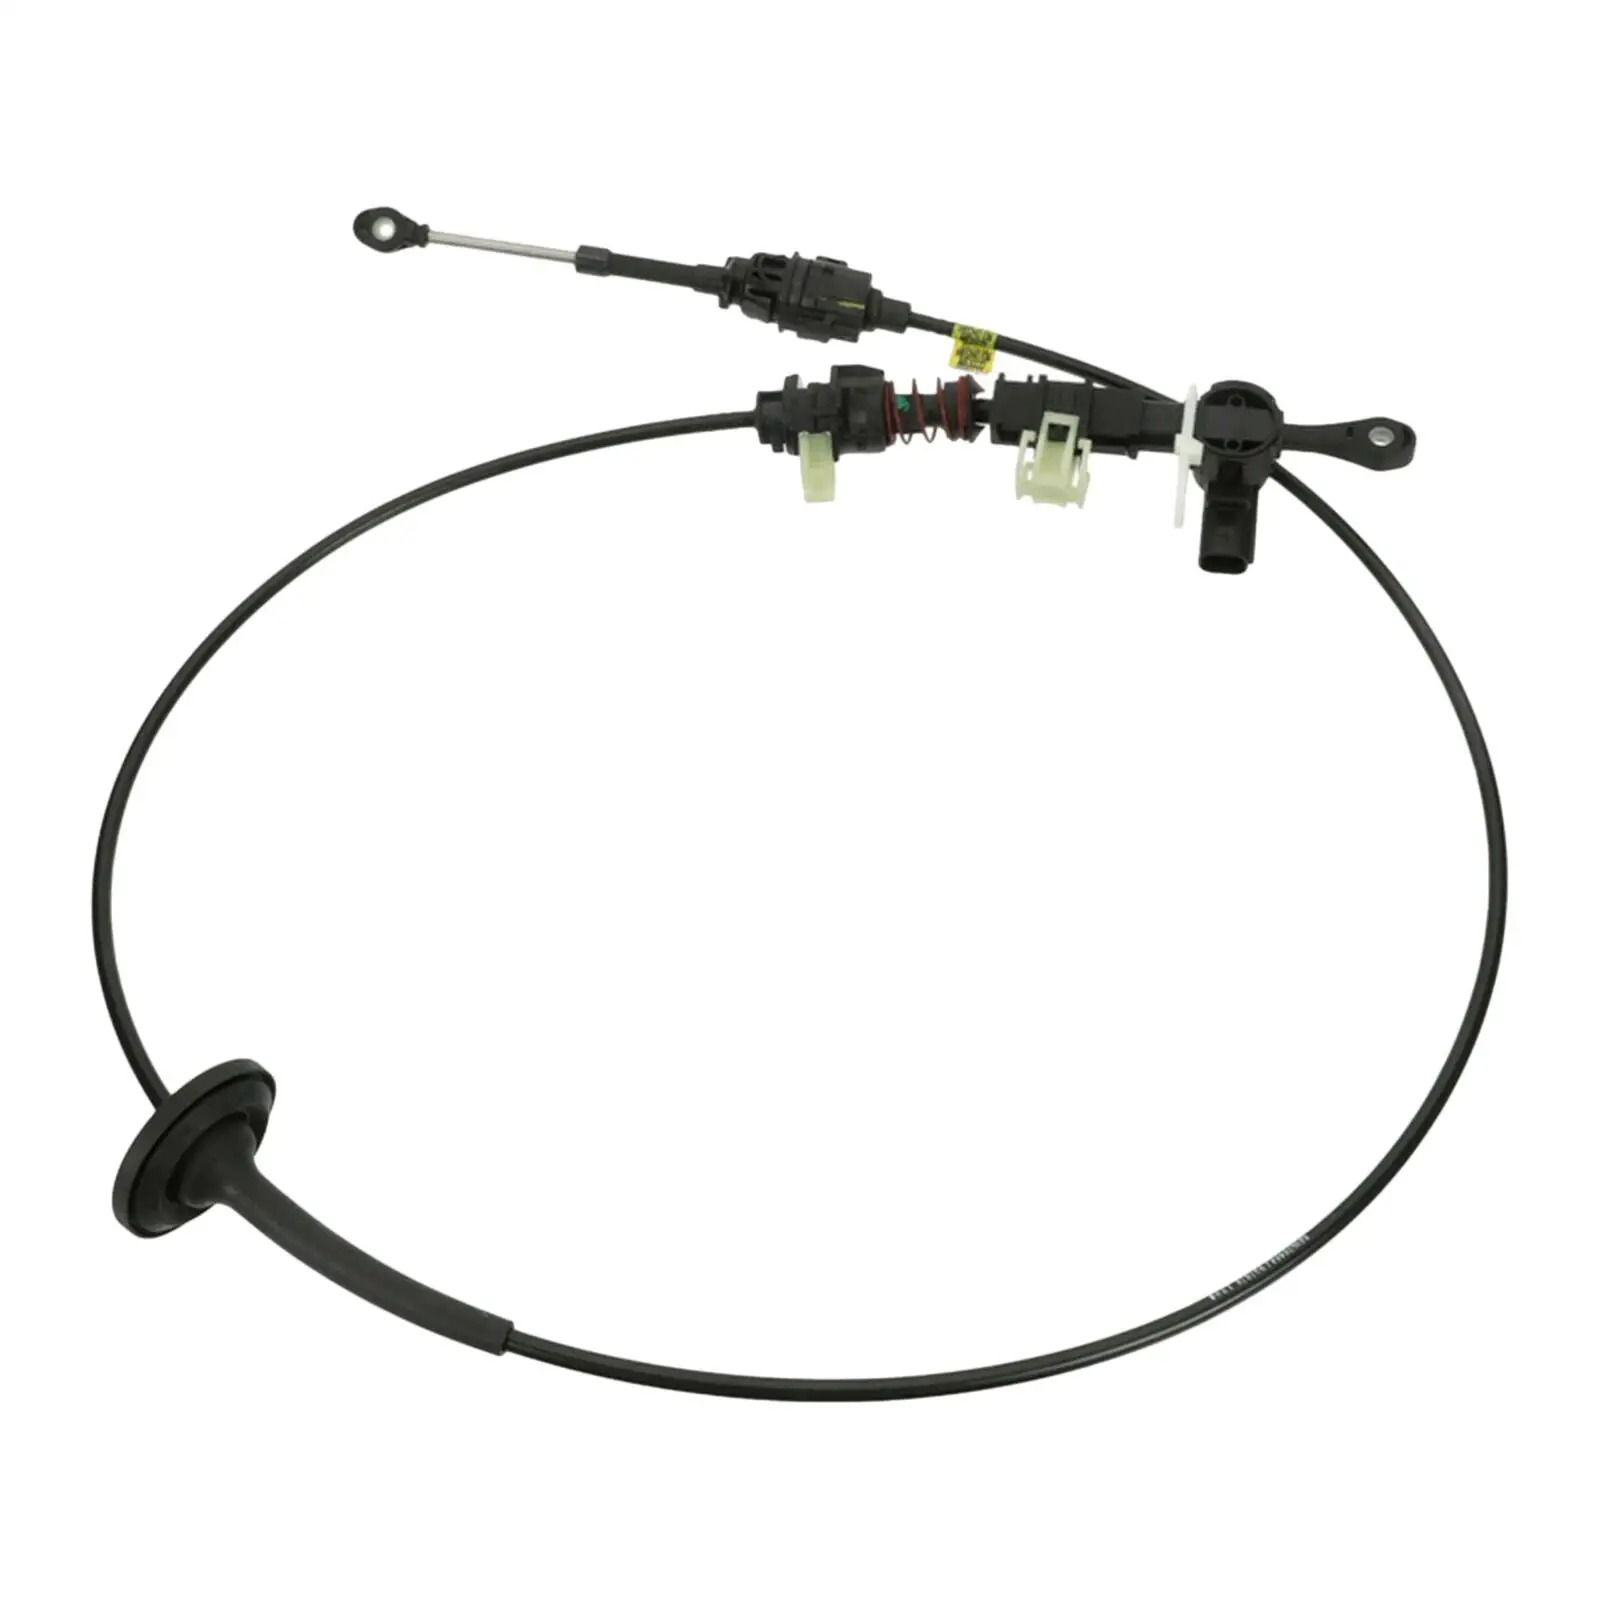  Control Cable,e Parts, Cable Modification Accessories Fit for RAM Pickup 02-500 3500